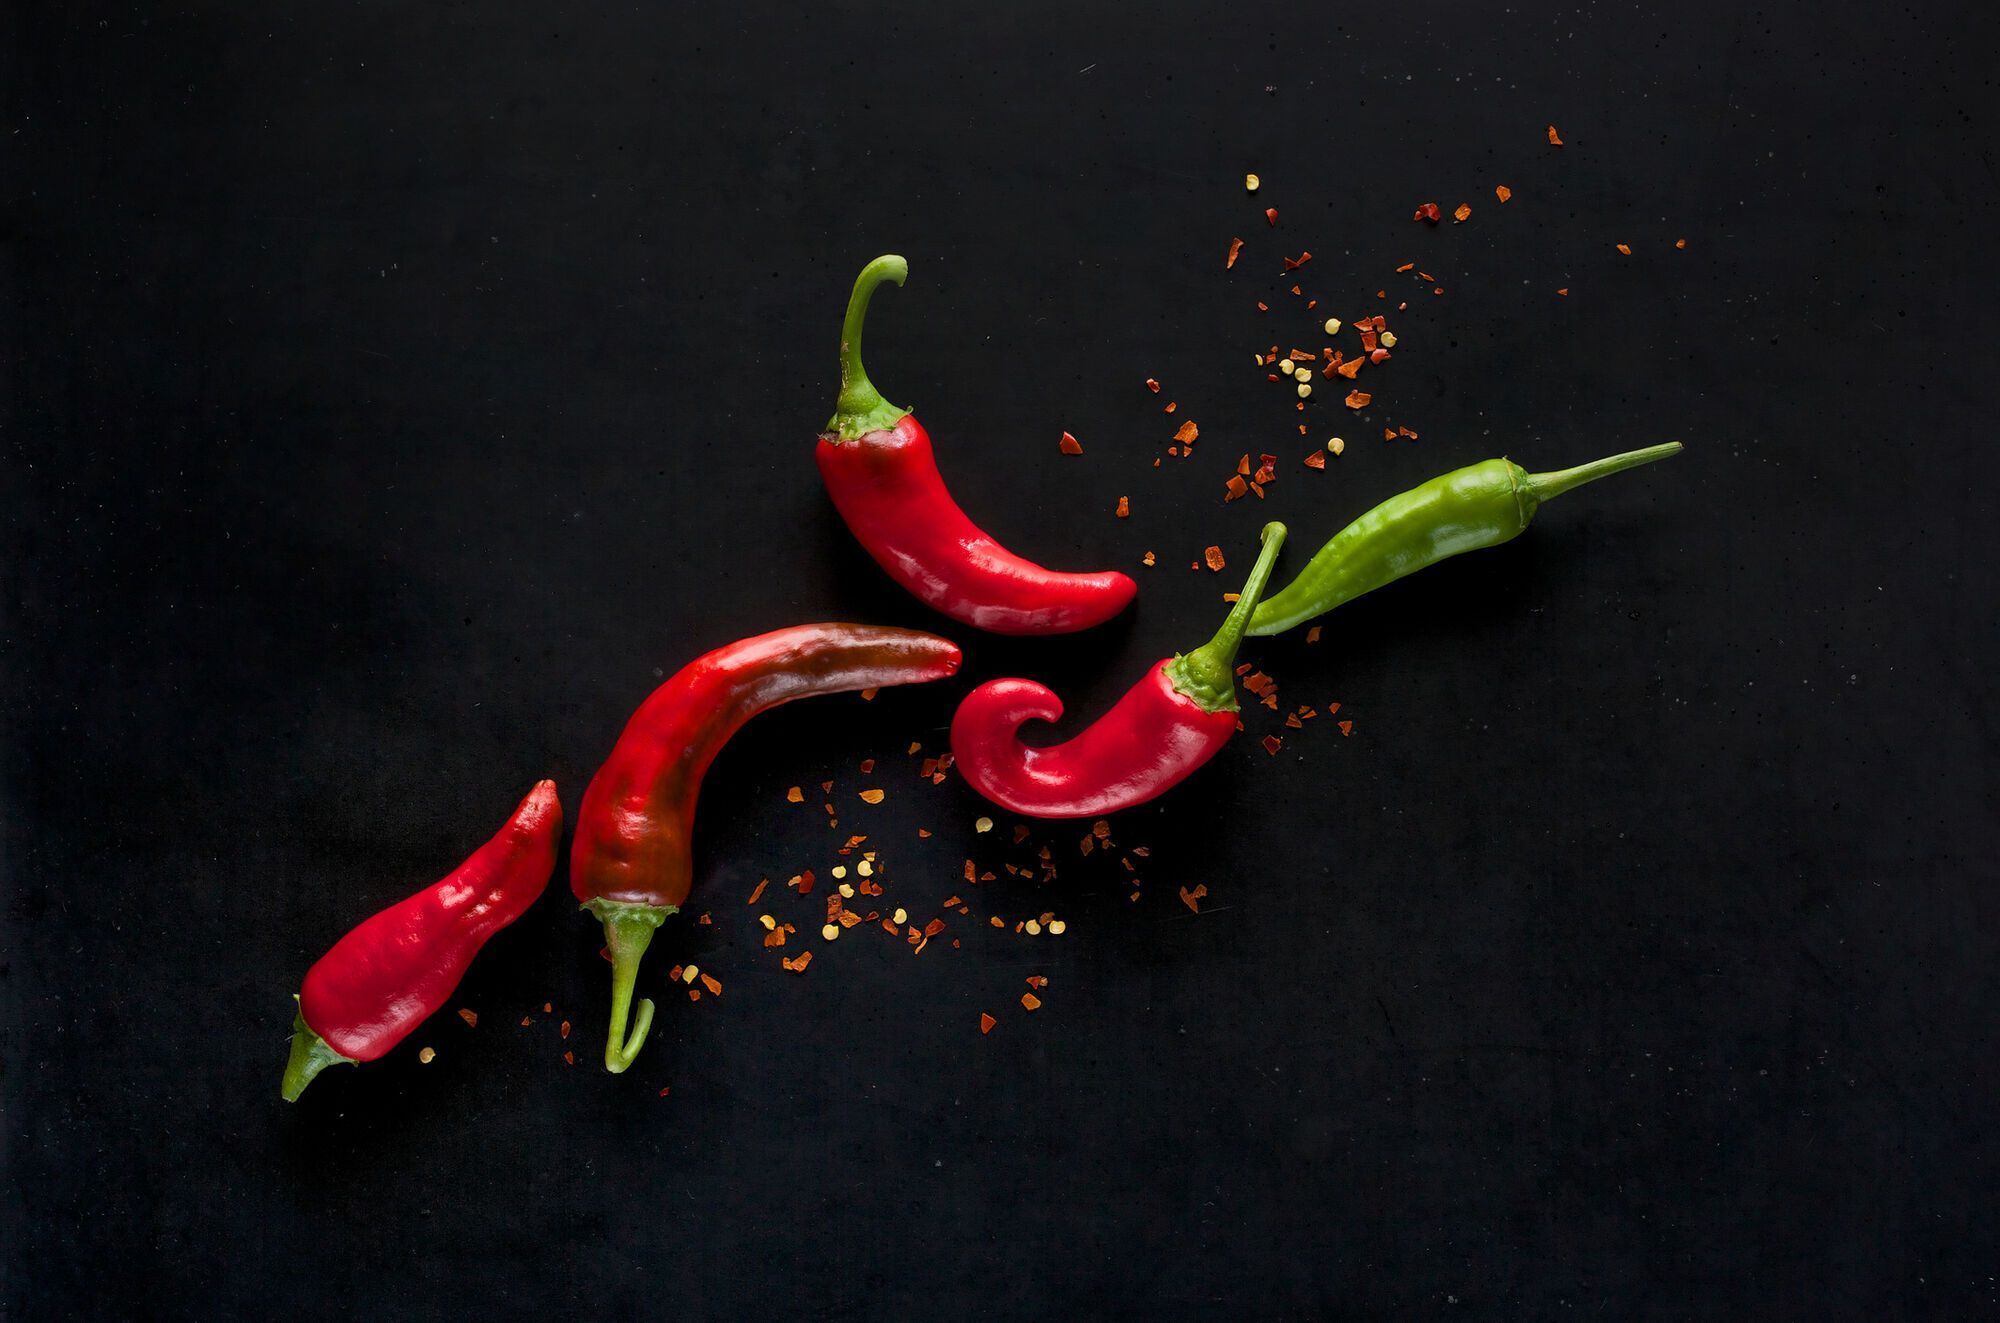 Chili peppers: important health benefits revealed